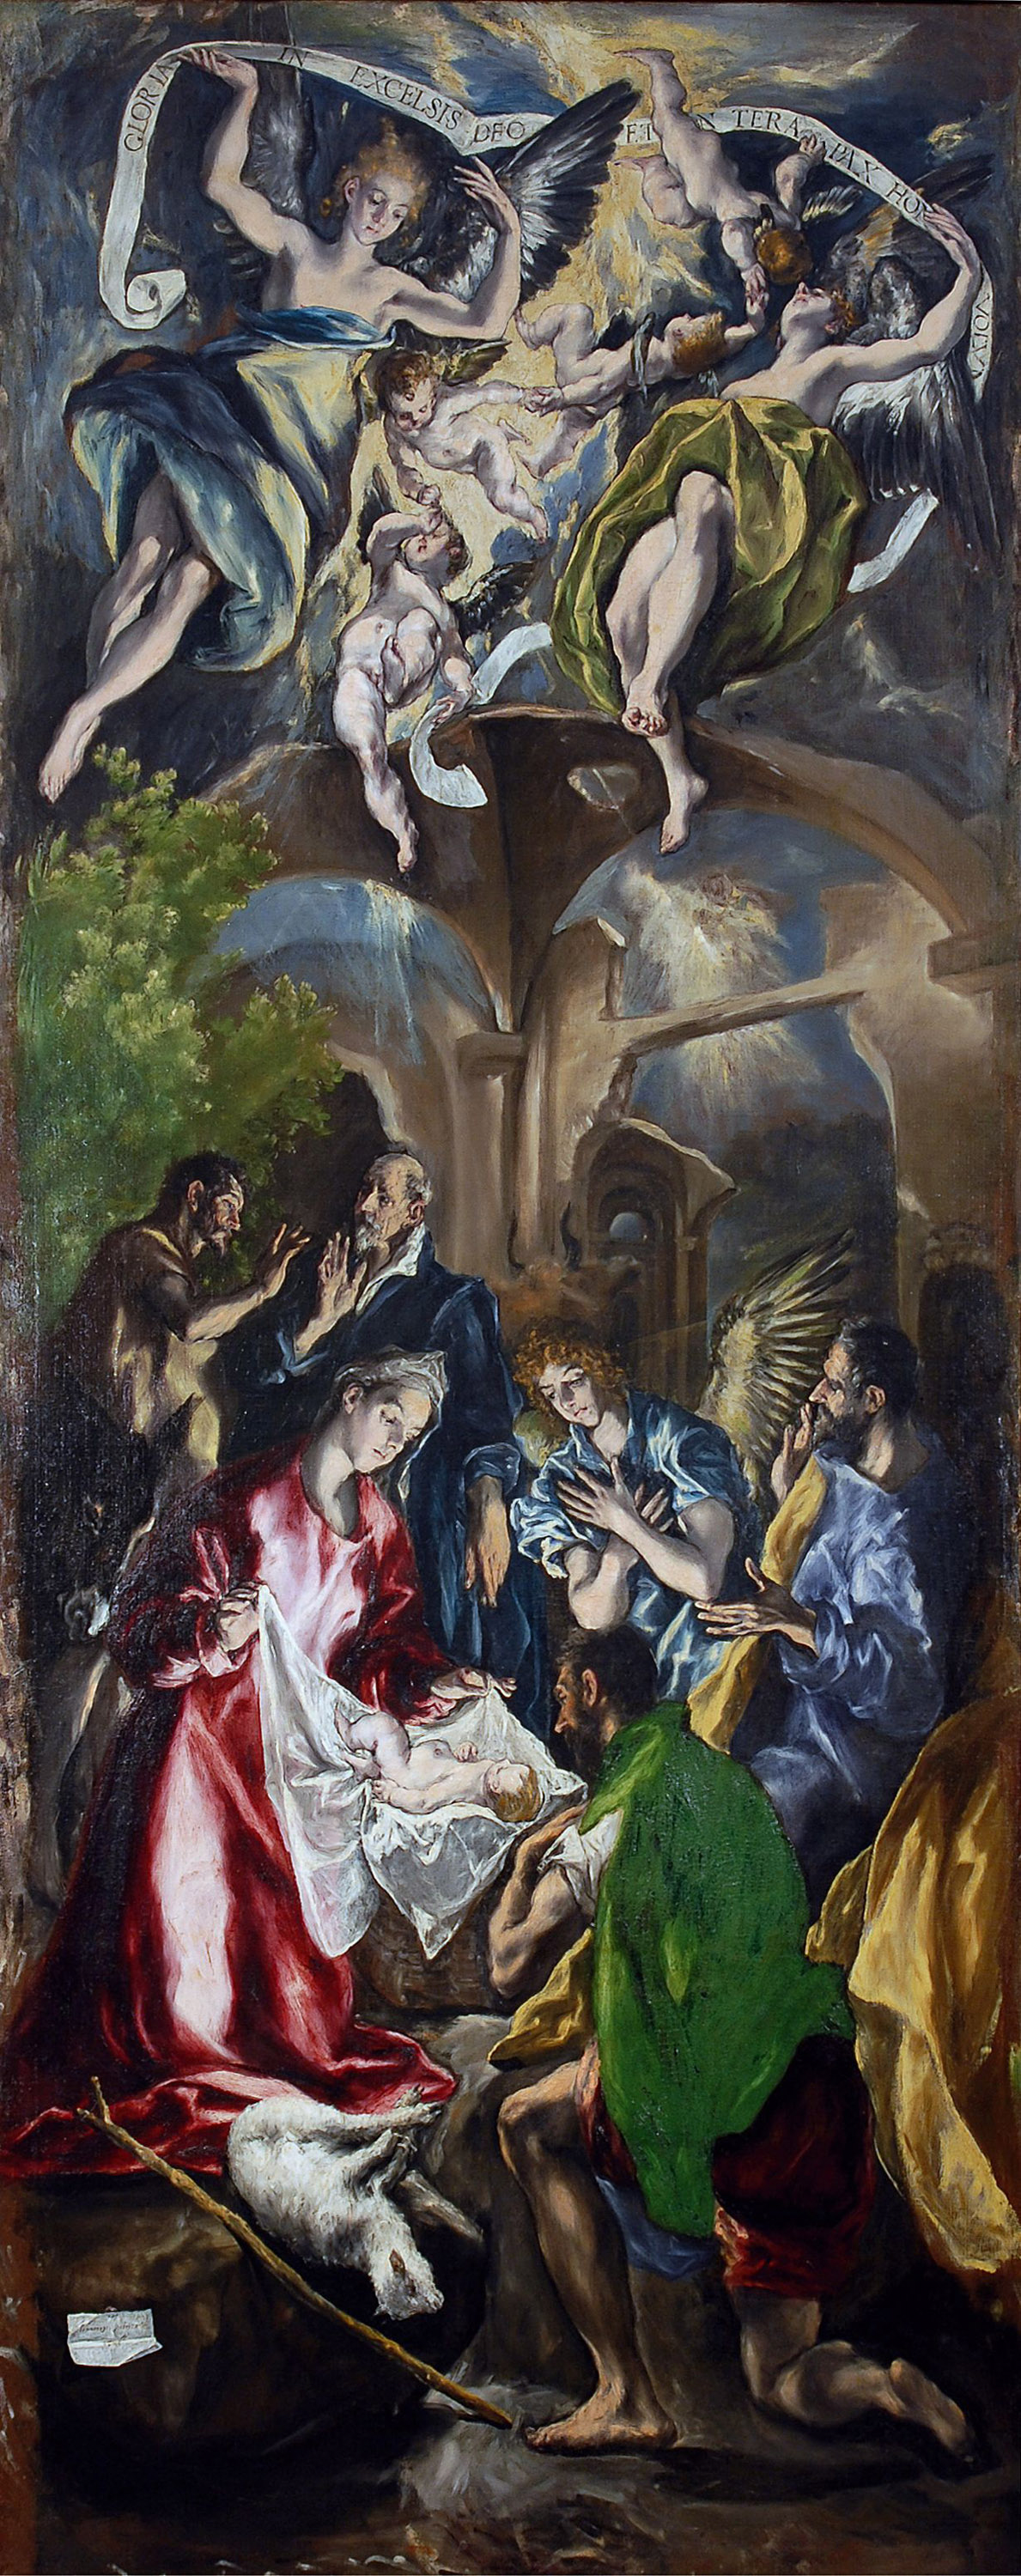 El Greco - The Adoration of the Shepherds